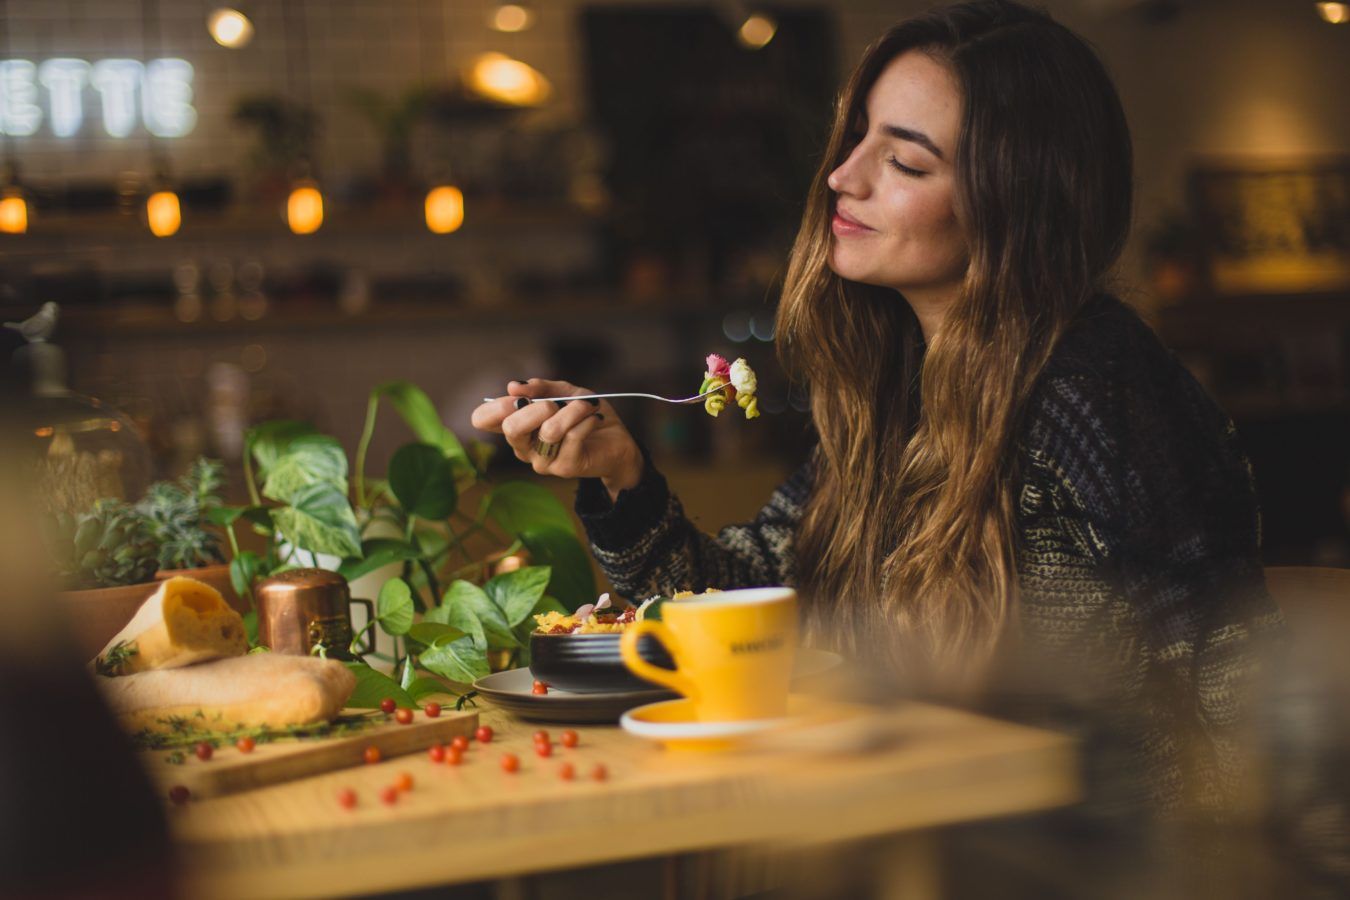 A step-by-step guide to mindful eating